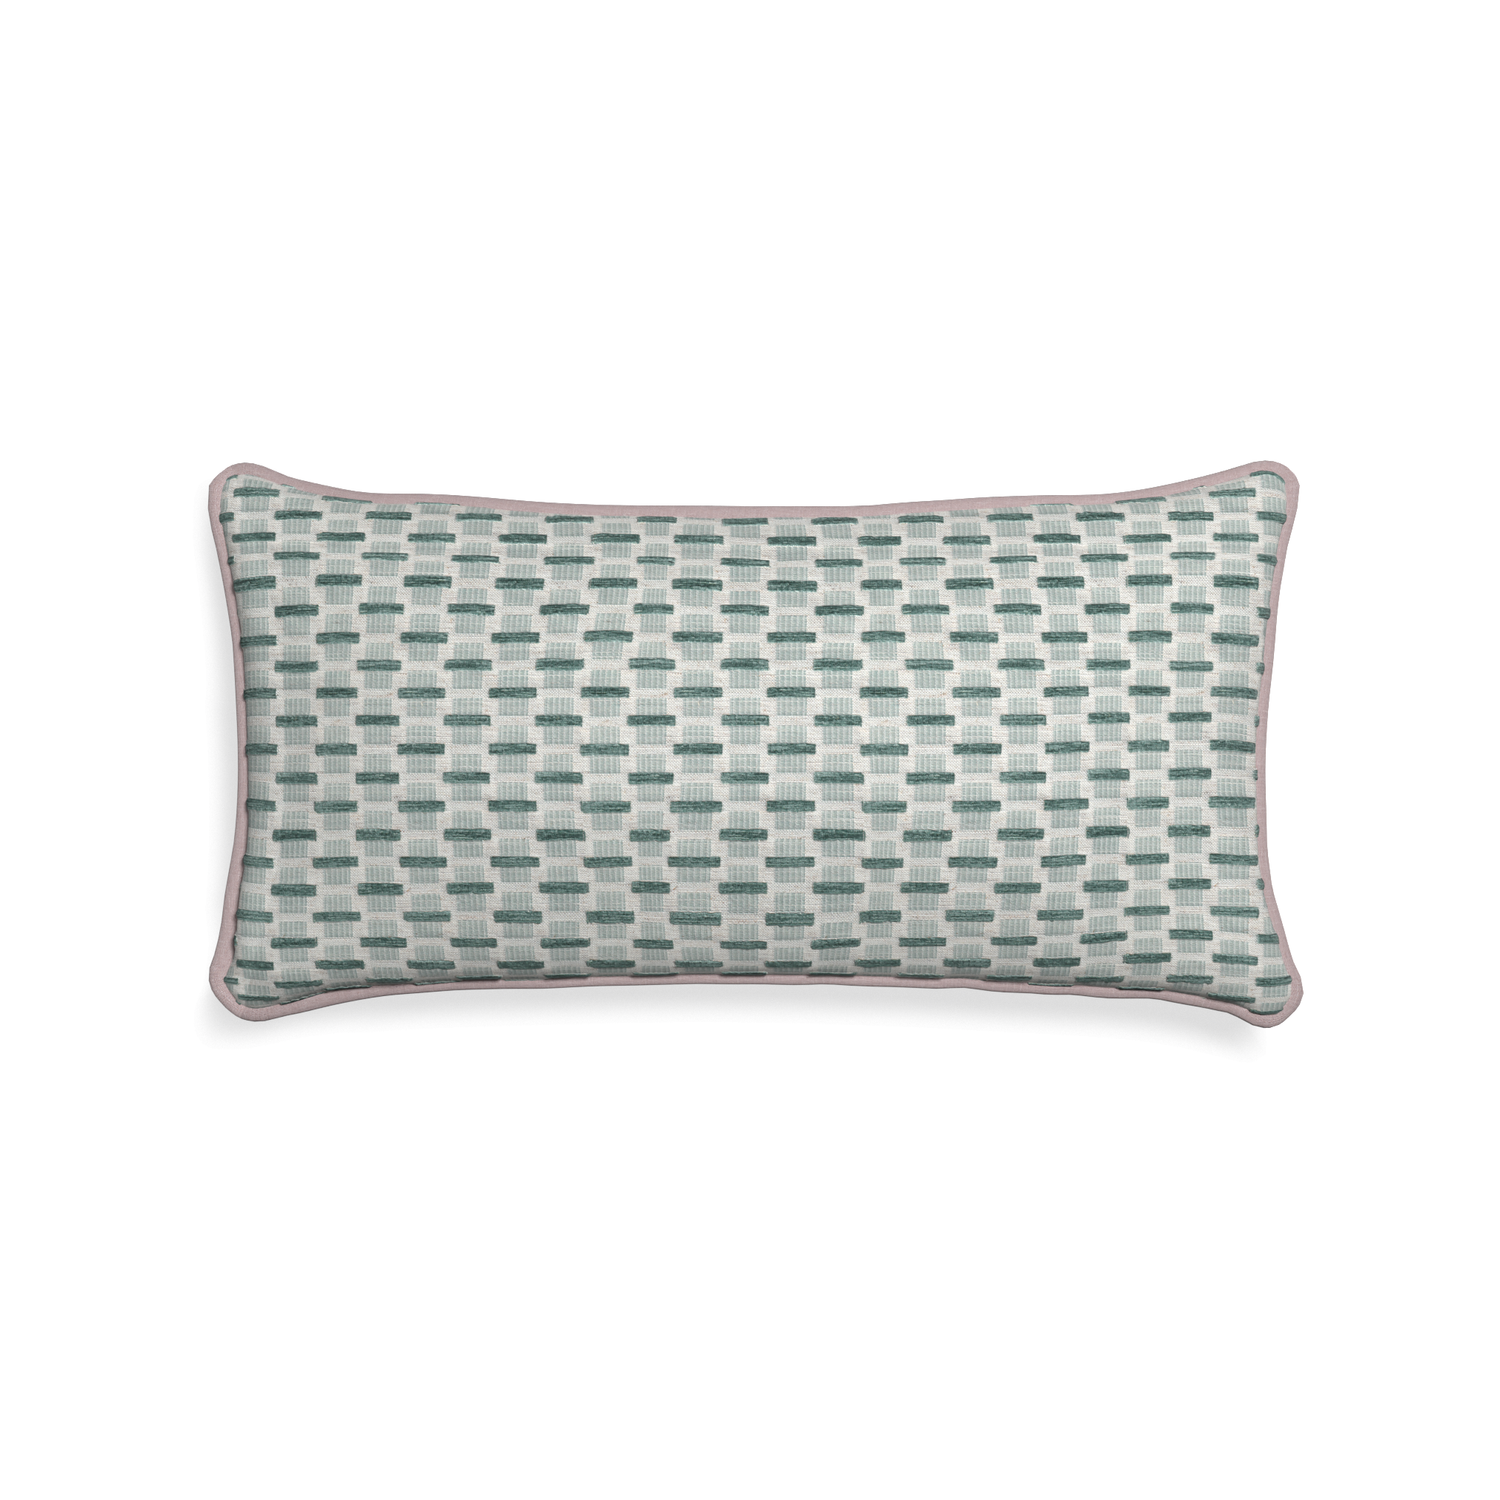 Midi-lumbar willow mint custom green geometric chenillepillow with orchid piping on white background